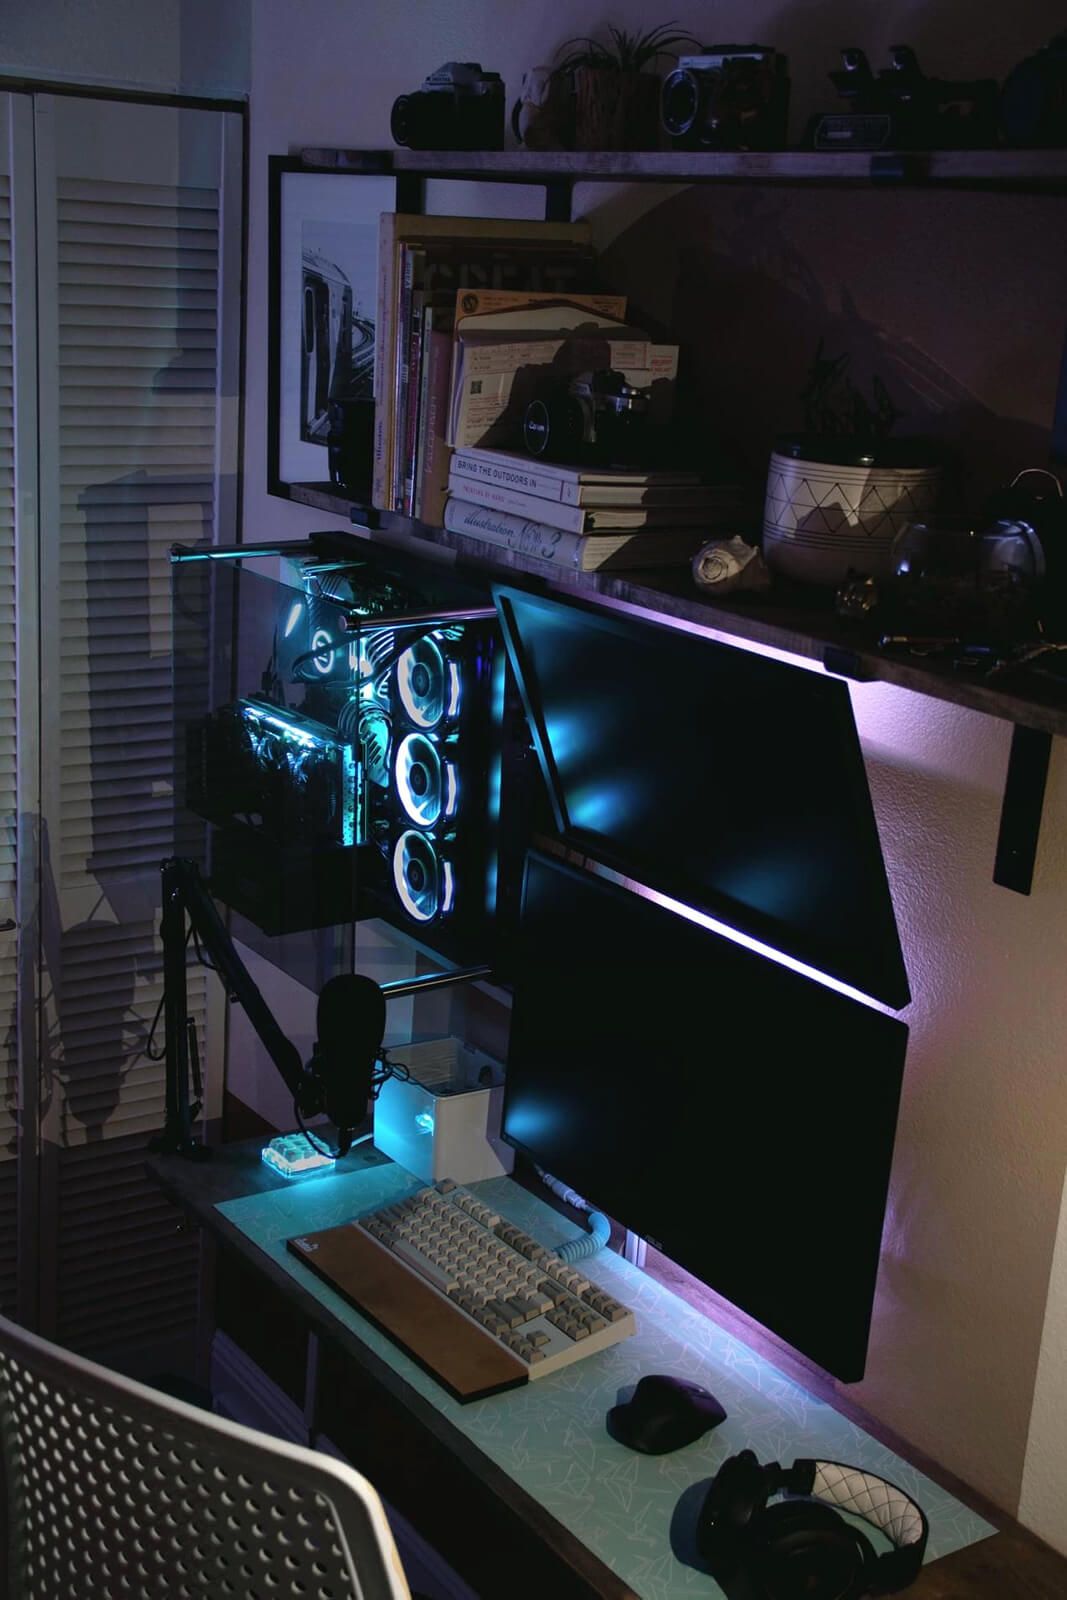 Wall-mounting helped Reddit user claporga to fit their cloffice battlestation into a tiny area